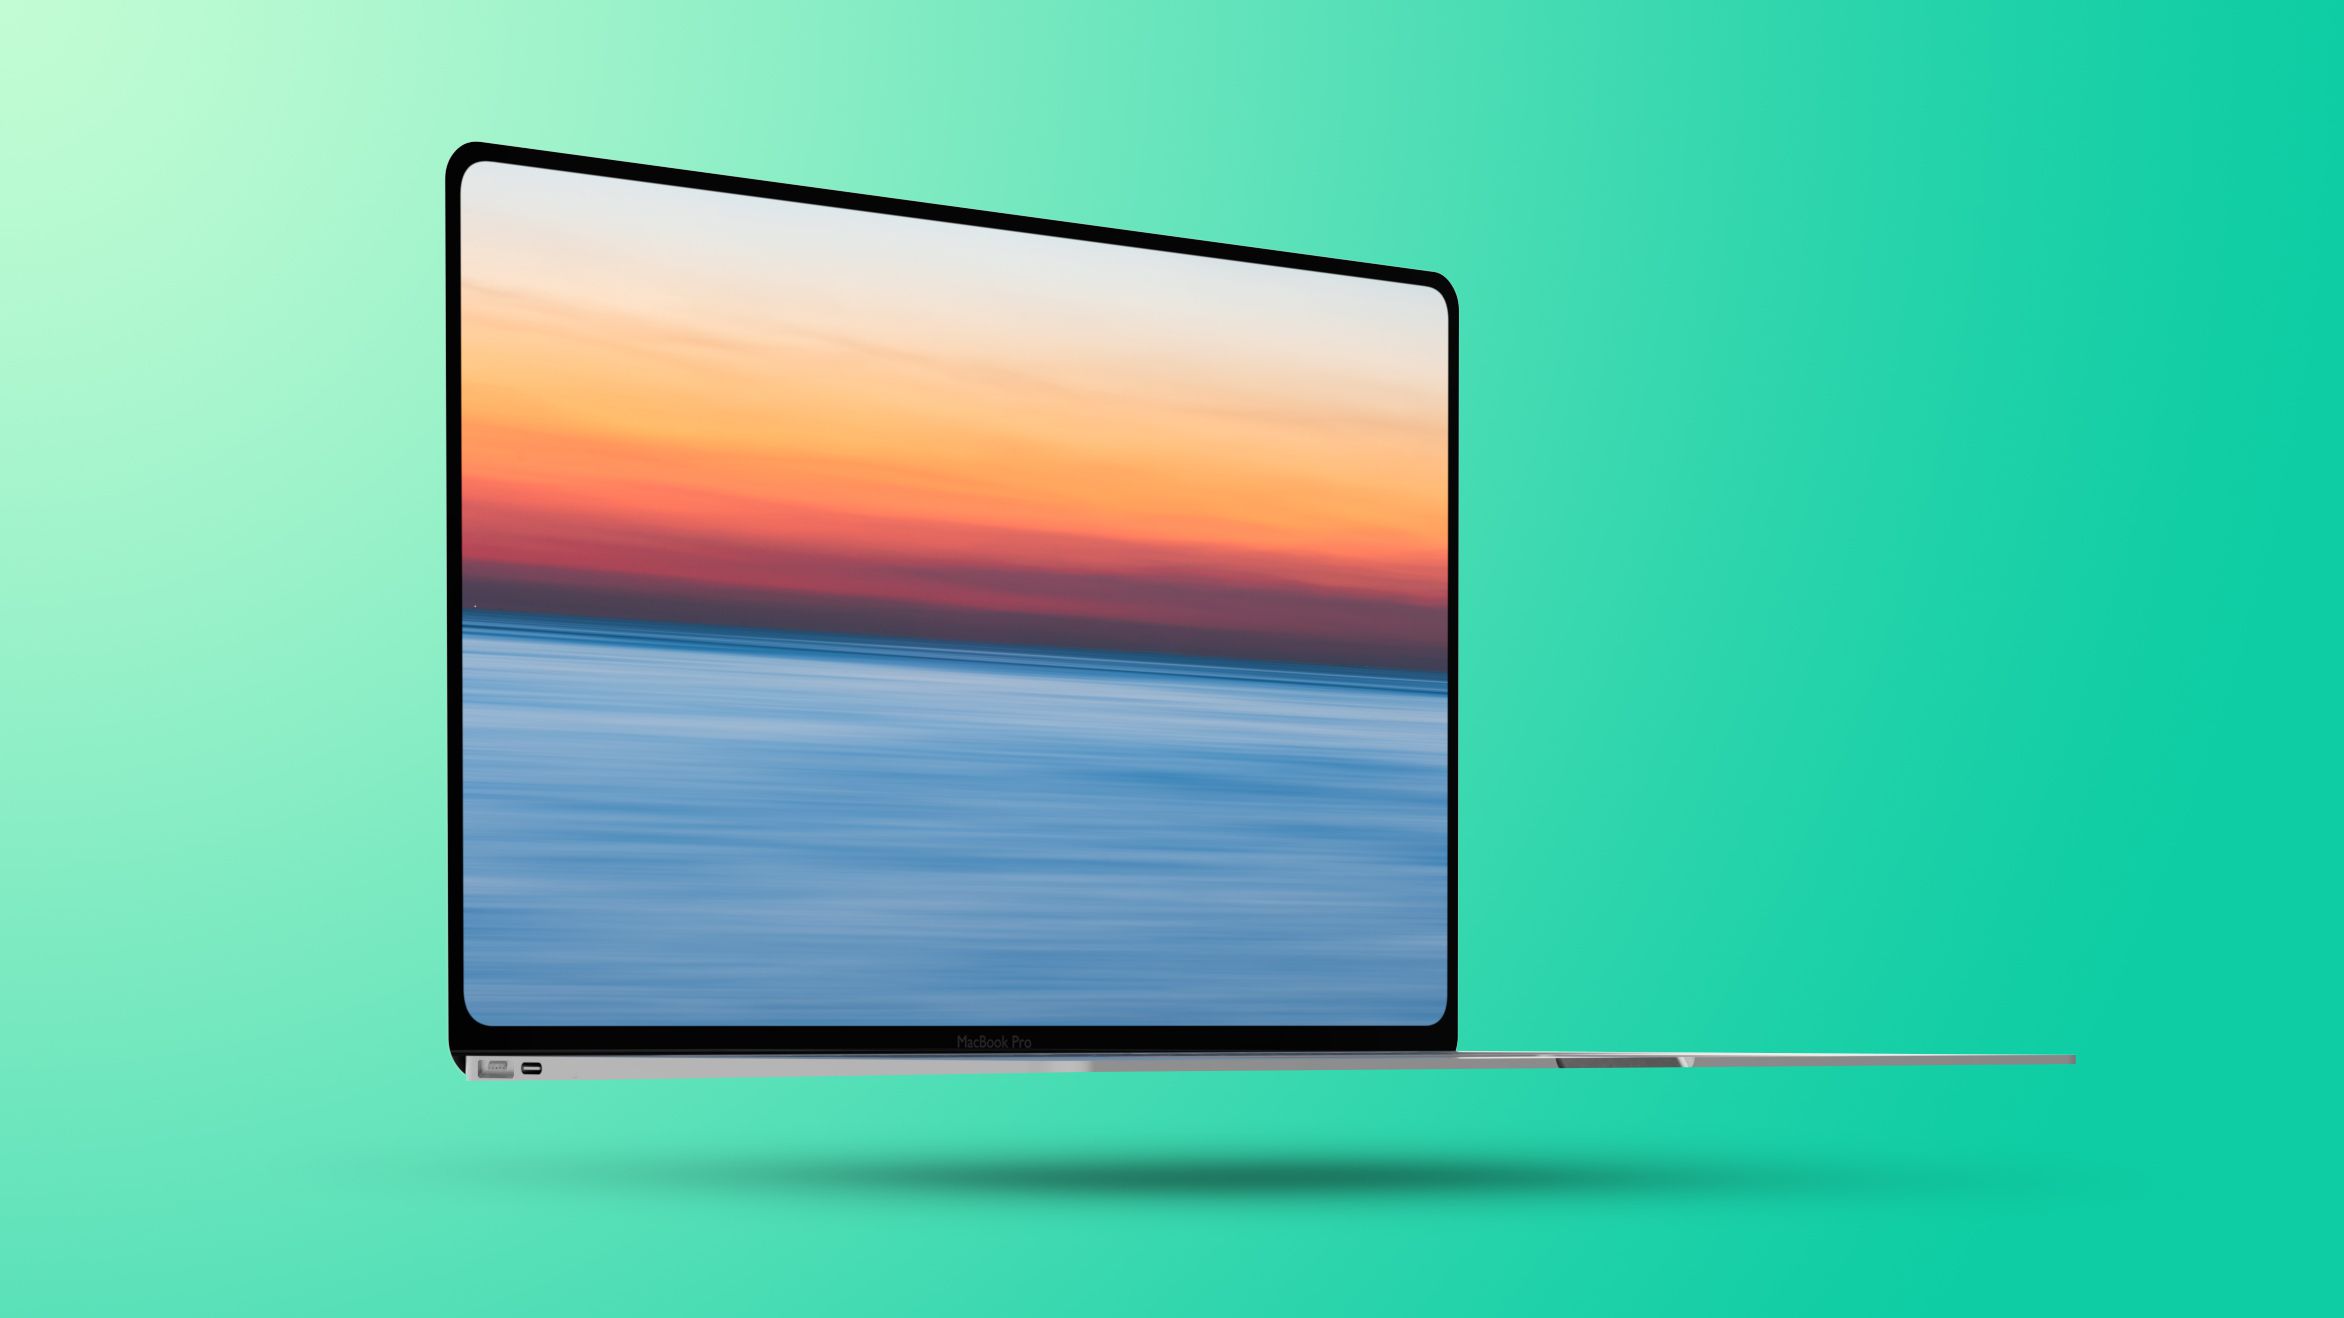 MacBook Air Coming in 2022 Also Rumored to Feature Notch Design - MacRumors